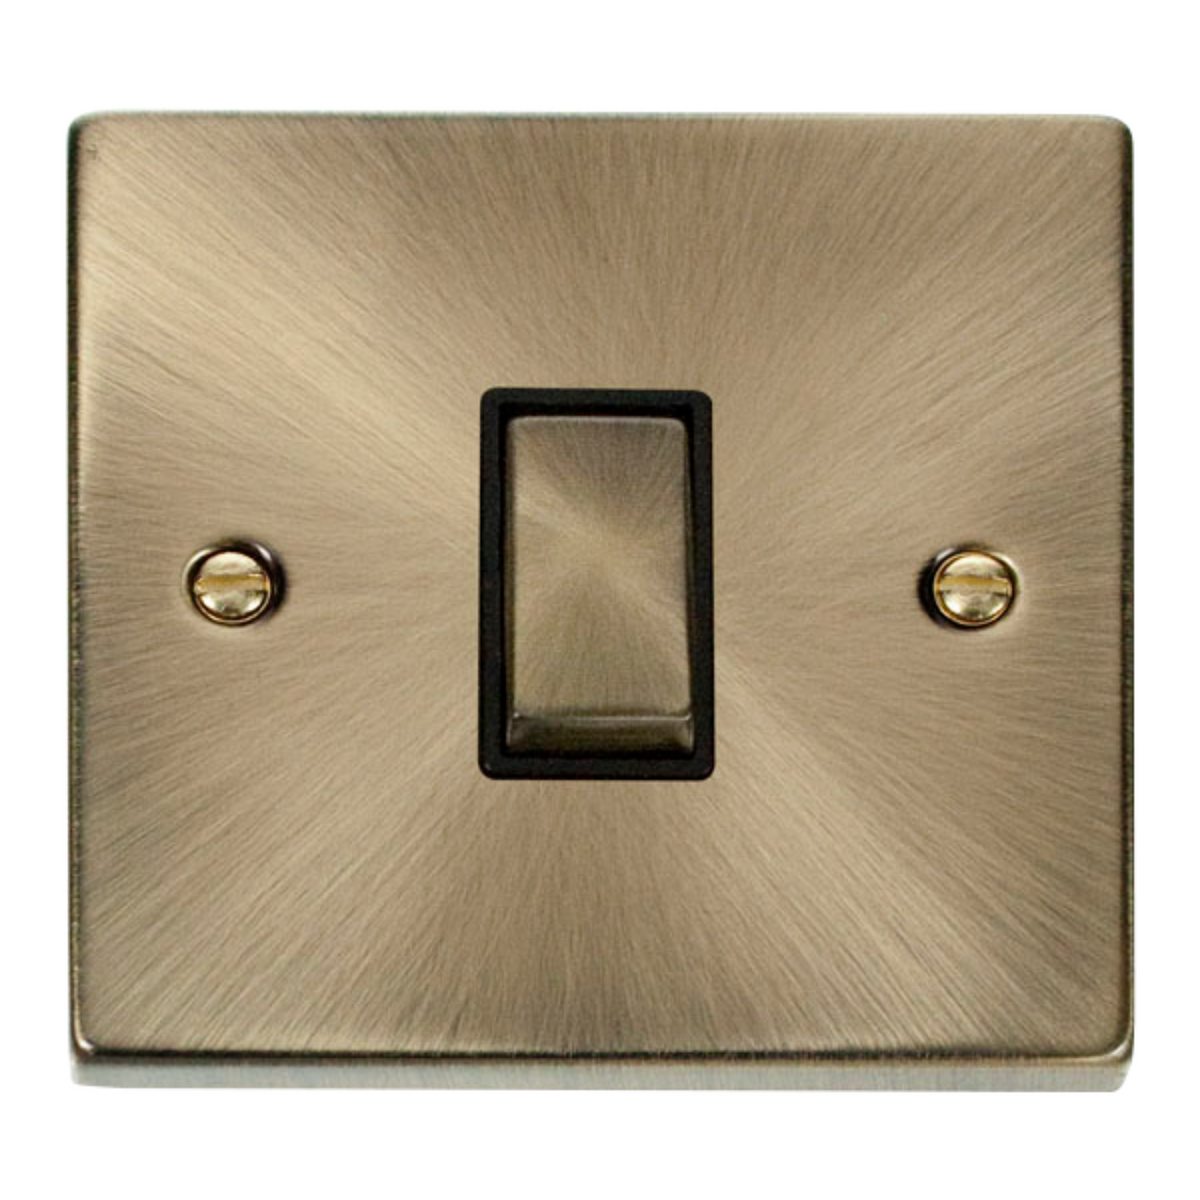 Z-Wave Smart Dimmer Switch in Antique Gold